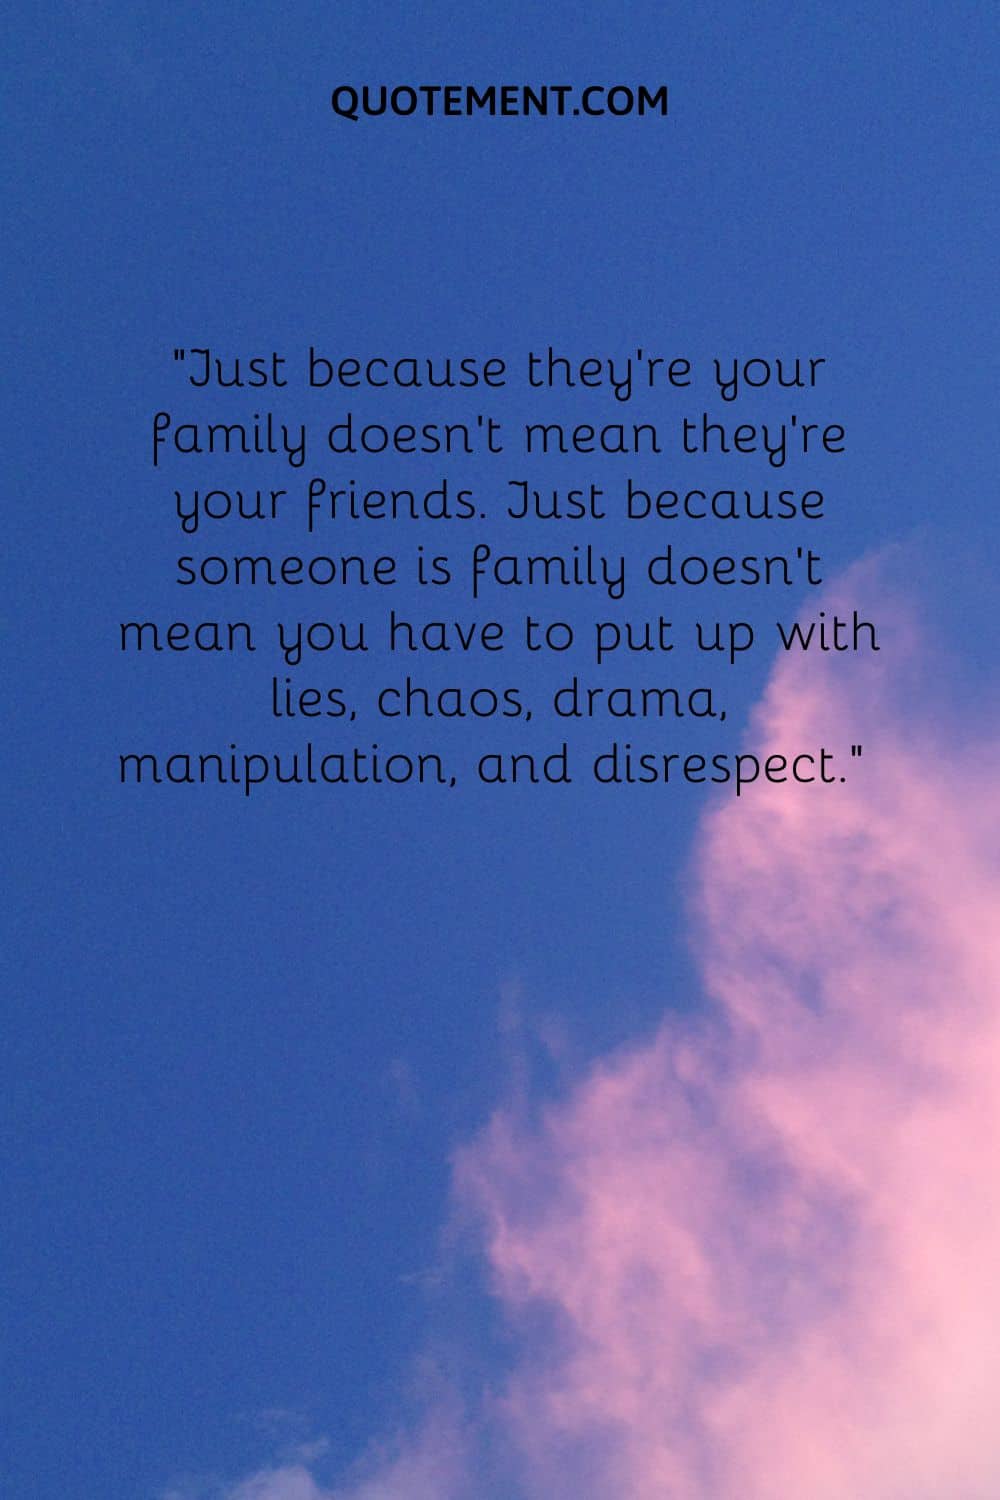 Just because they’re your family doesn’t mean they’re your friends